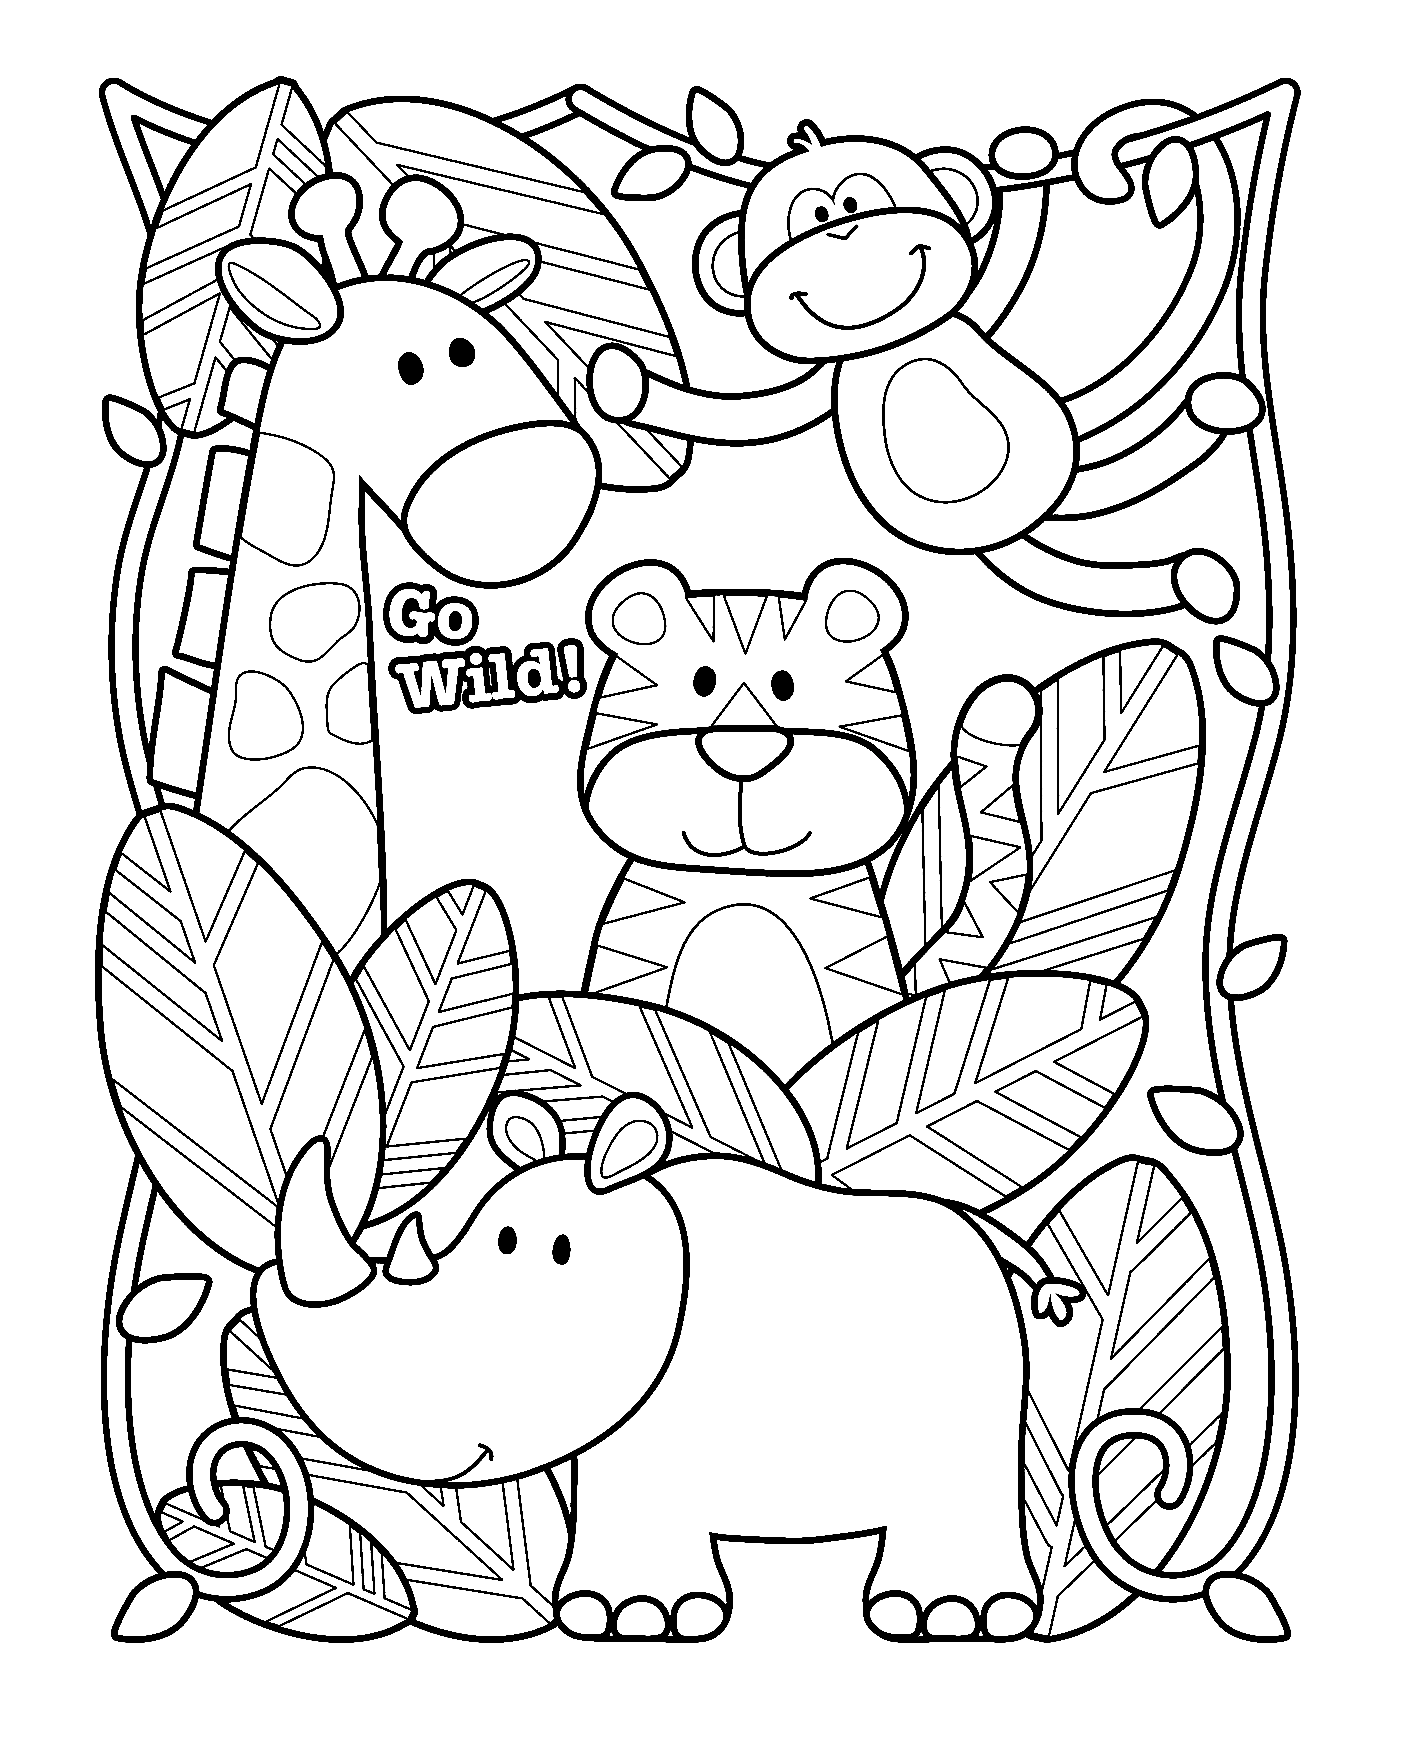 Zoo coloring pages printable for free download